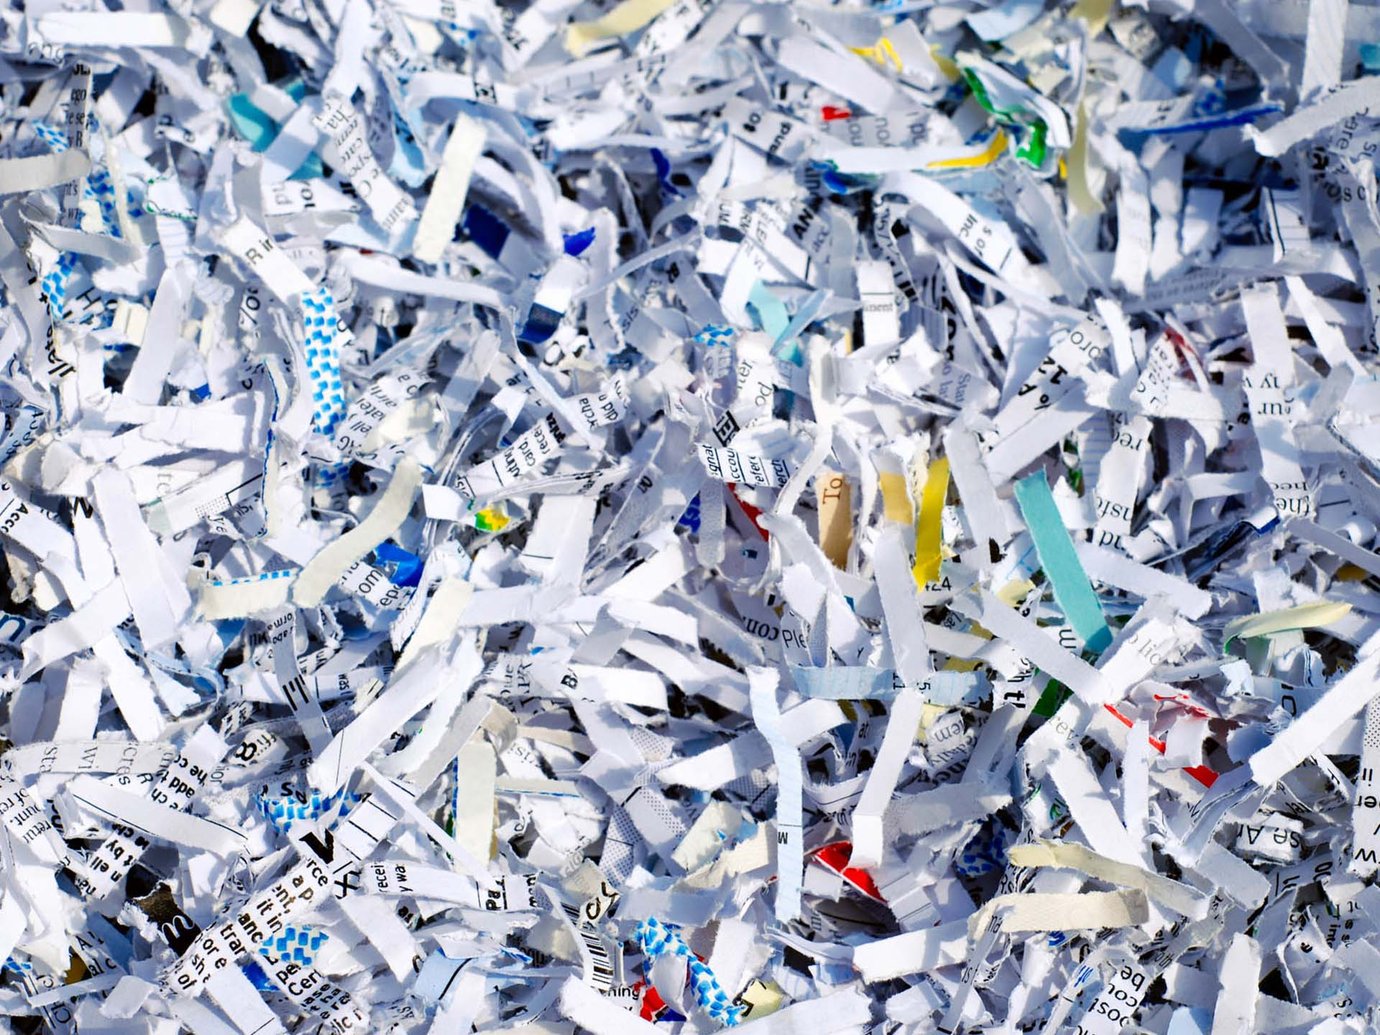 Shredded Paper - Waste Reduction & Recycling